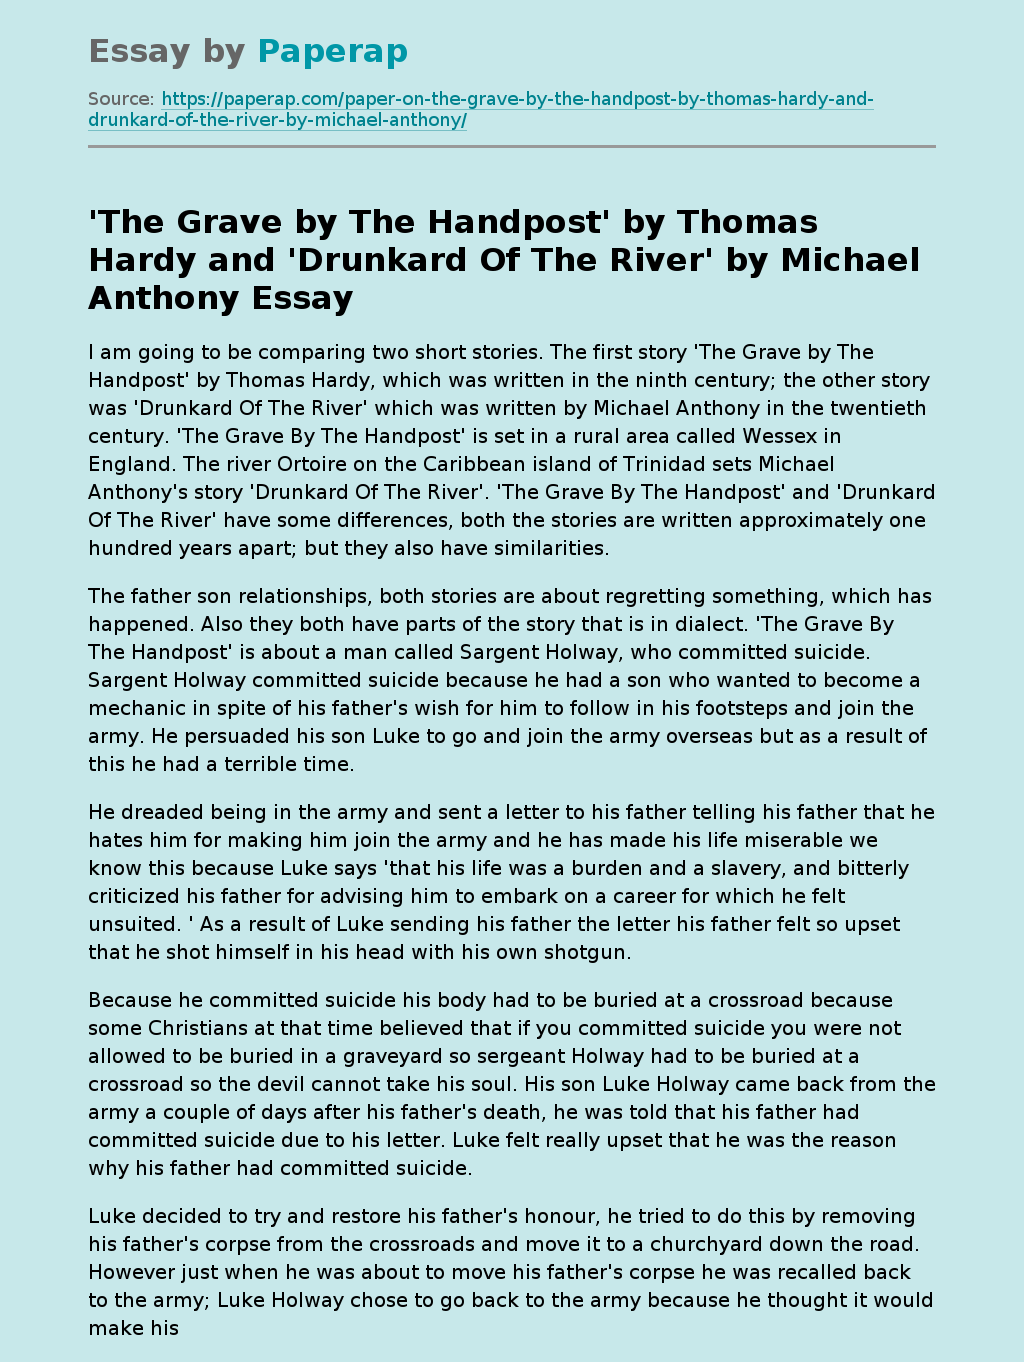 'The Grave by The Handpost' by Thomas Hardy and 'Drunkard Of The River' by Michael Anthony